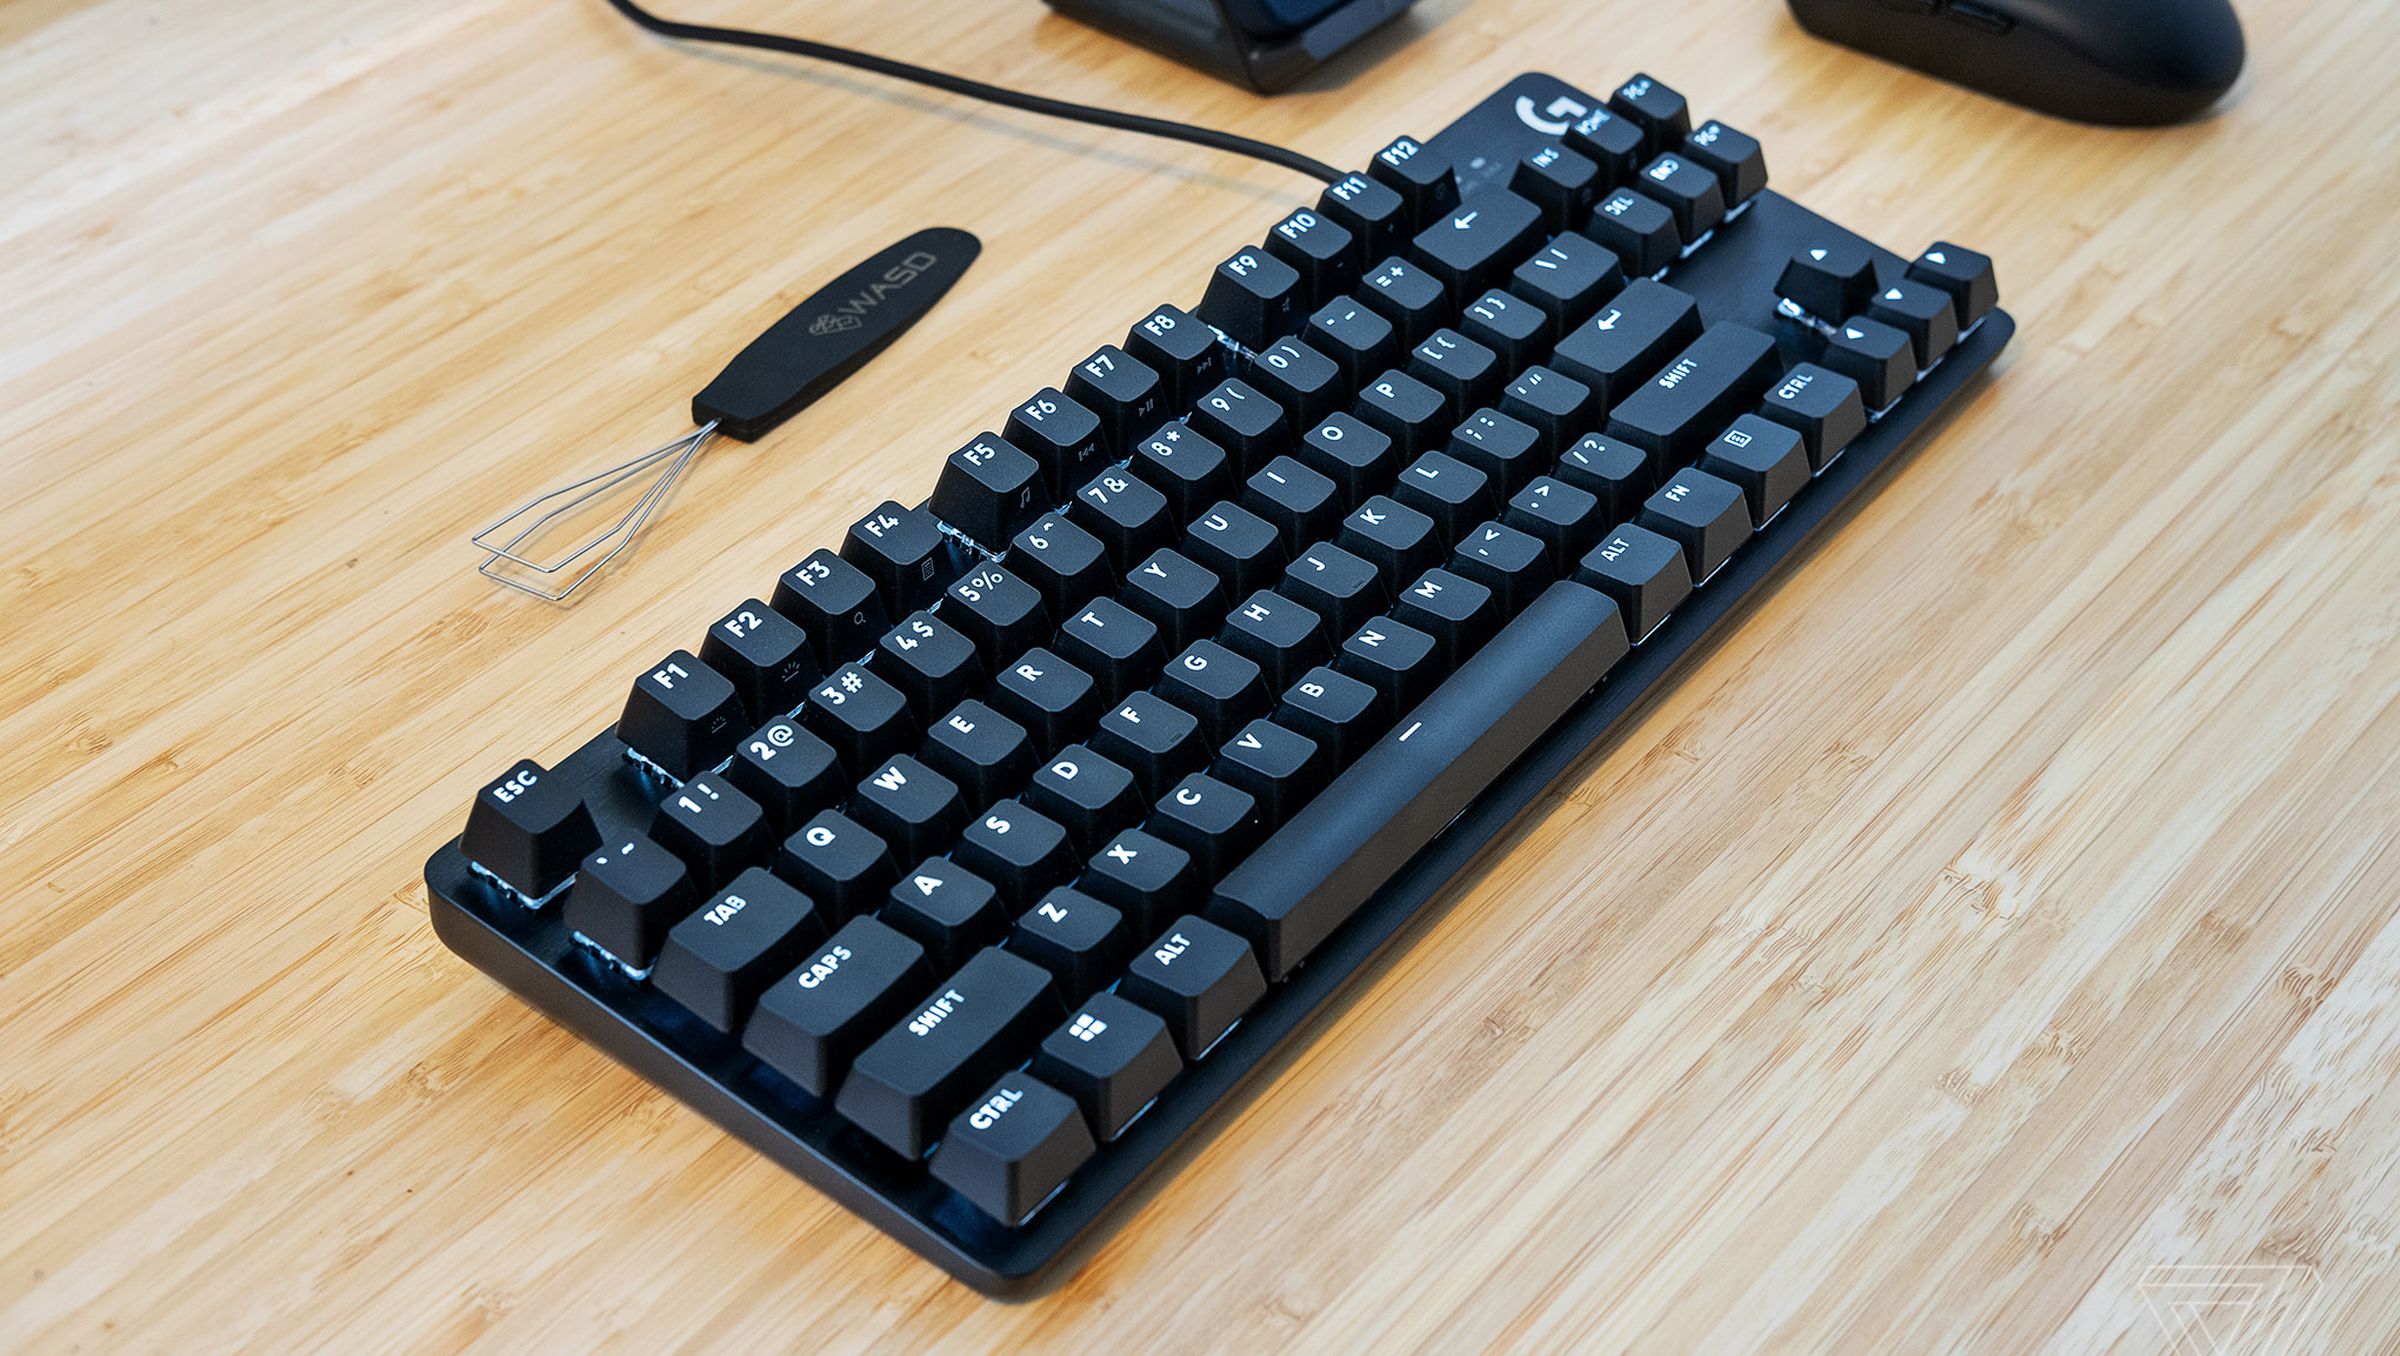 Logitech G413 TKL SE review: you get what you pay for - The Verge